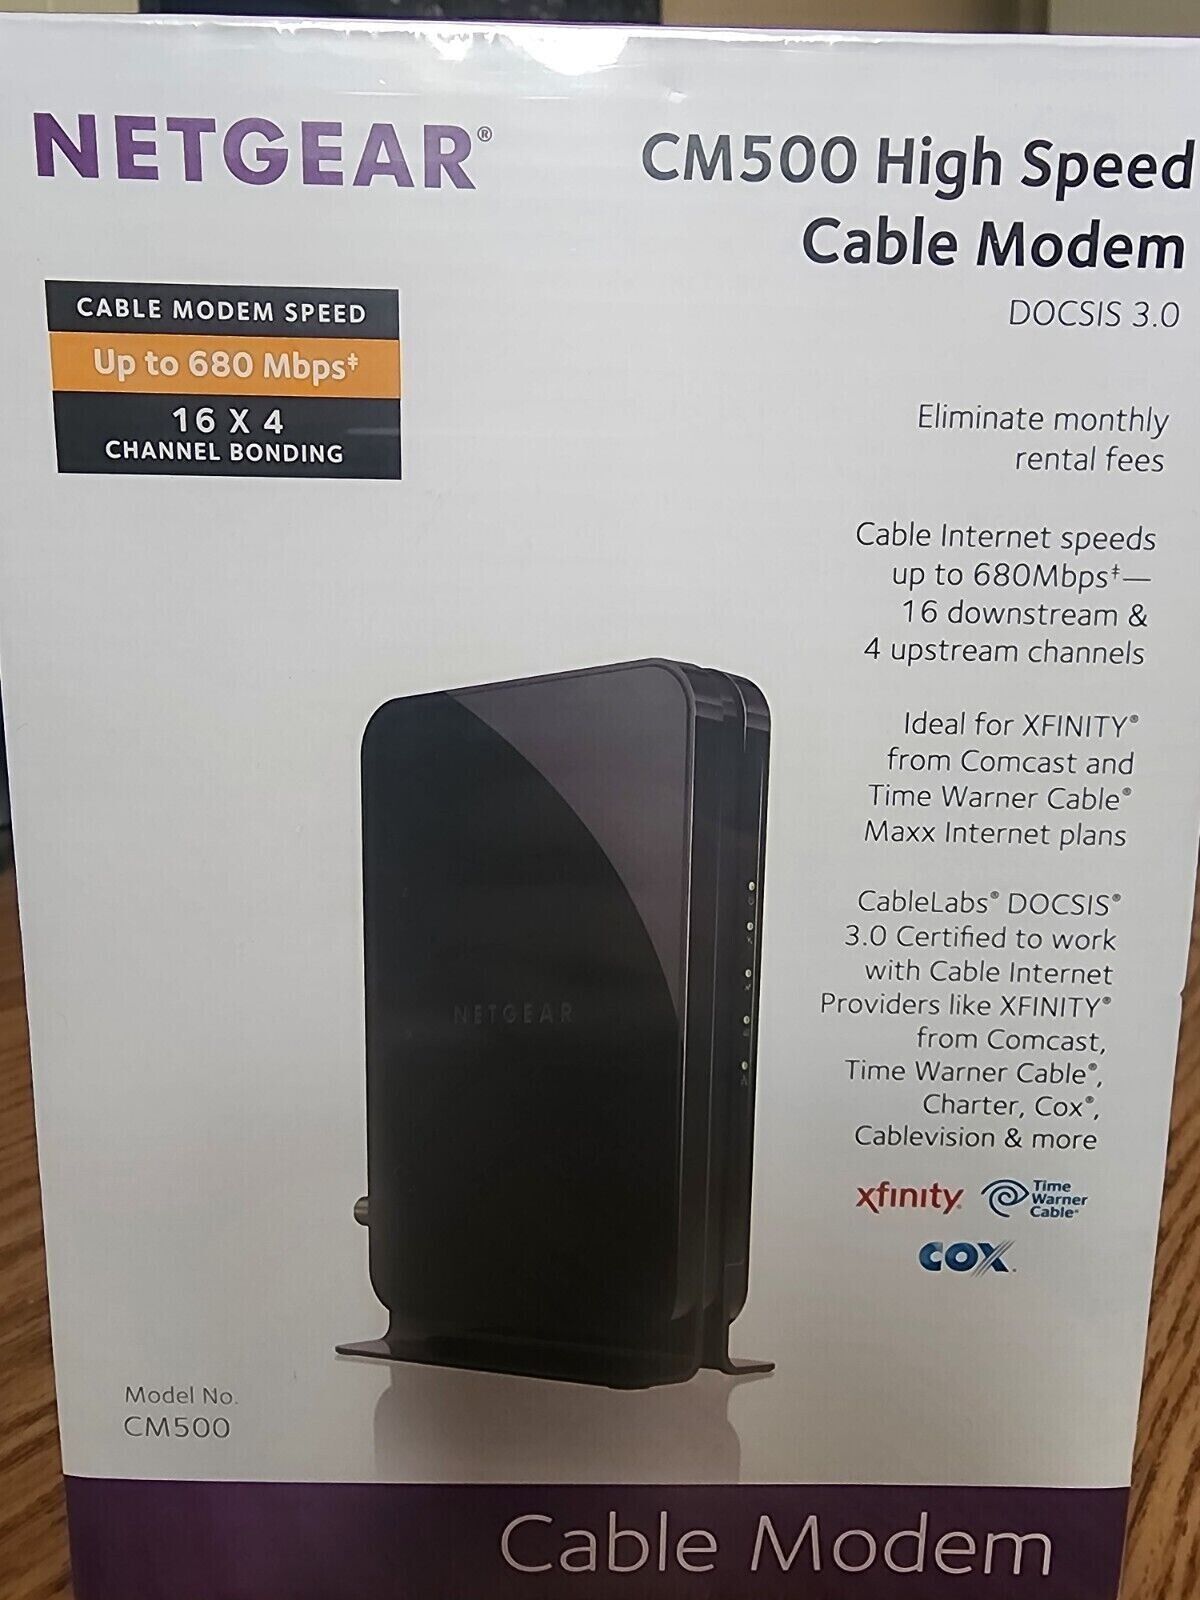 NEW Netgear CM500 High Speed Cable Modem | Docsis 3.0  16x4 Channel 680Mbps